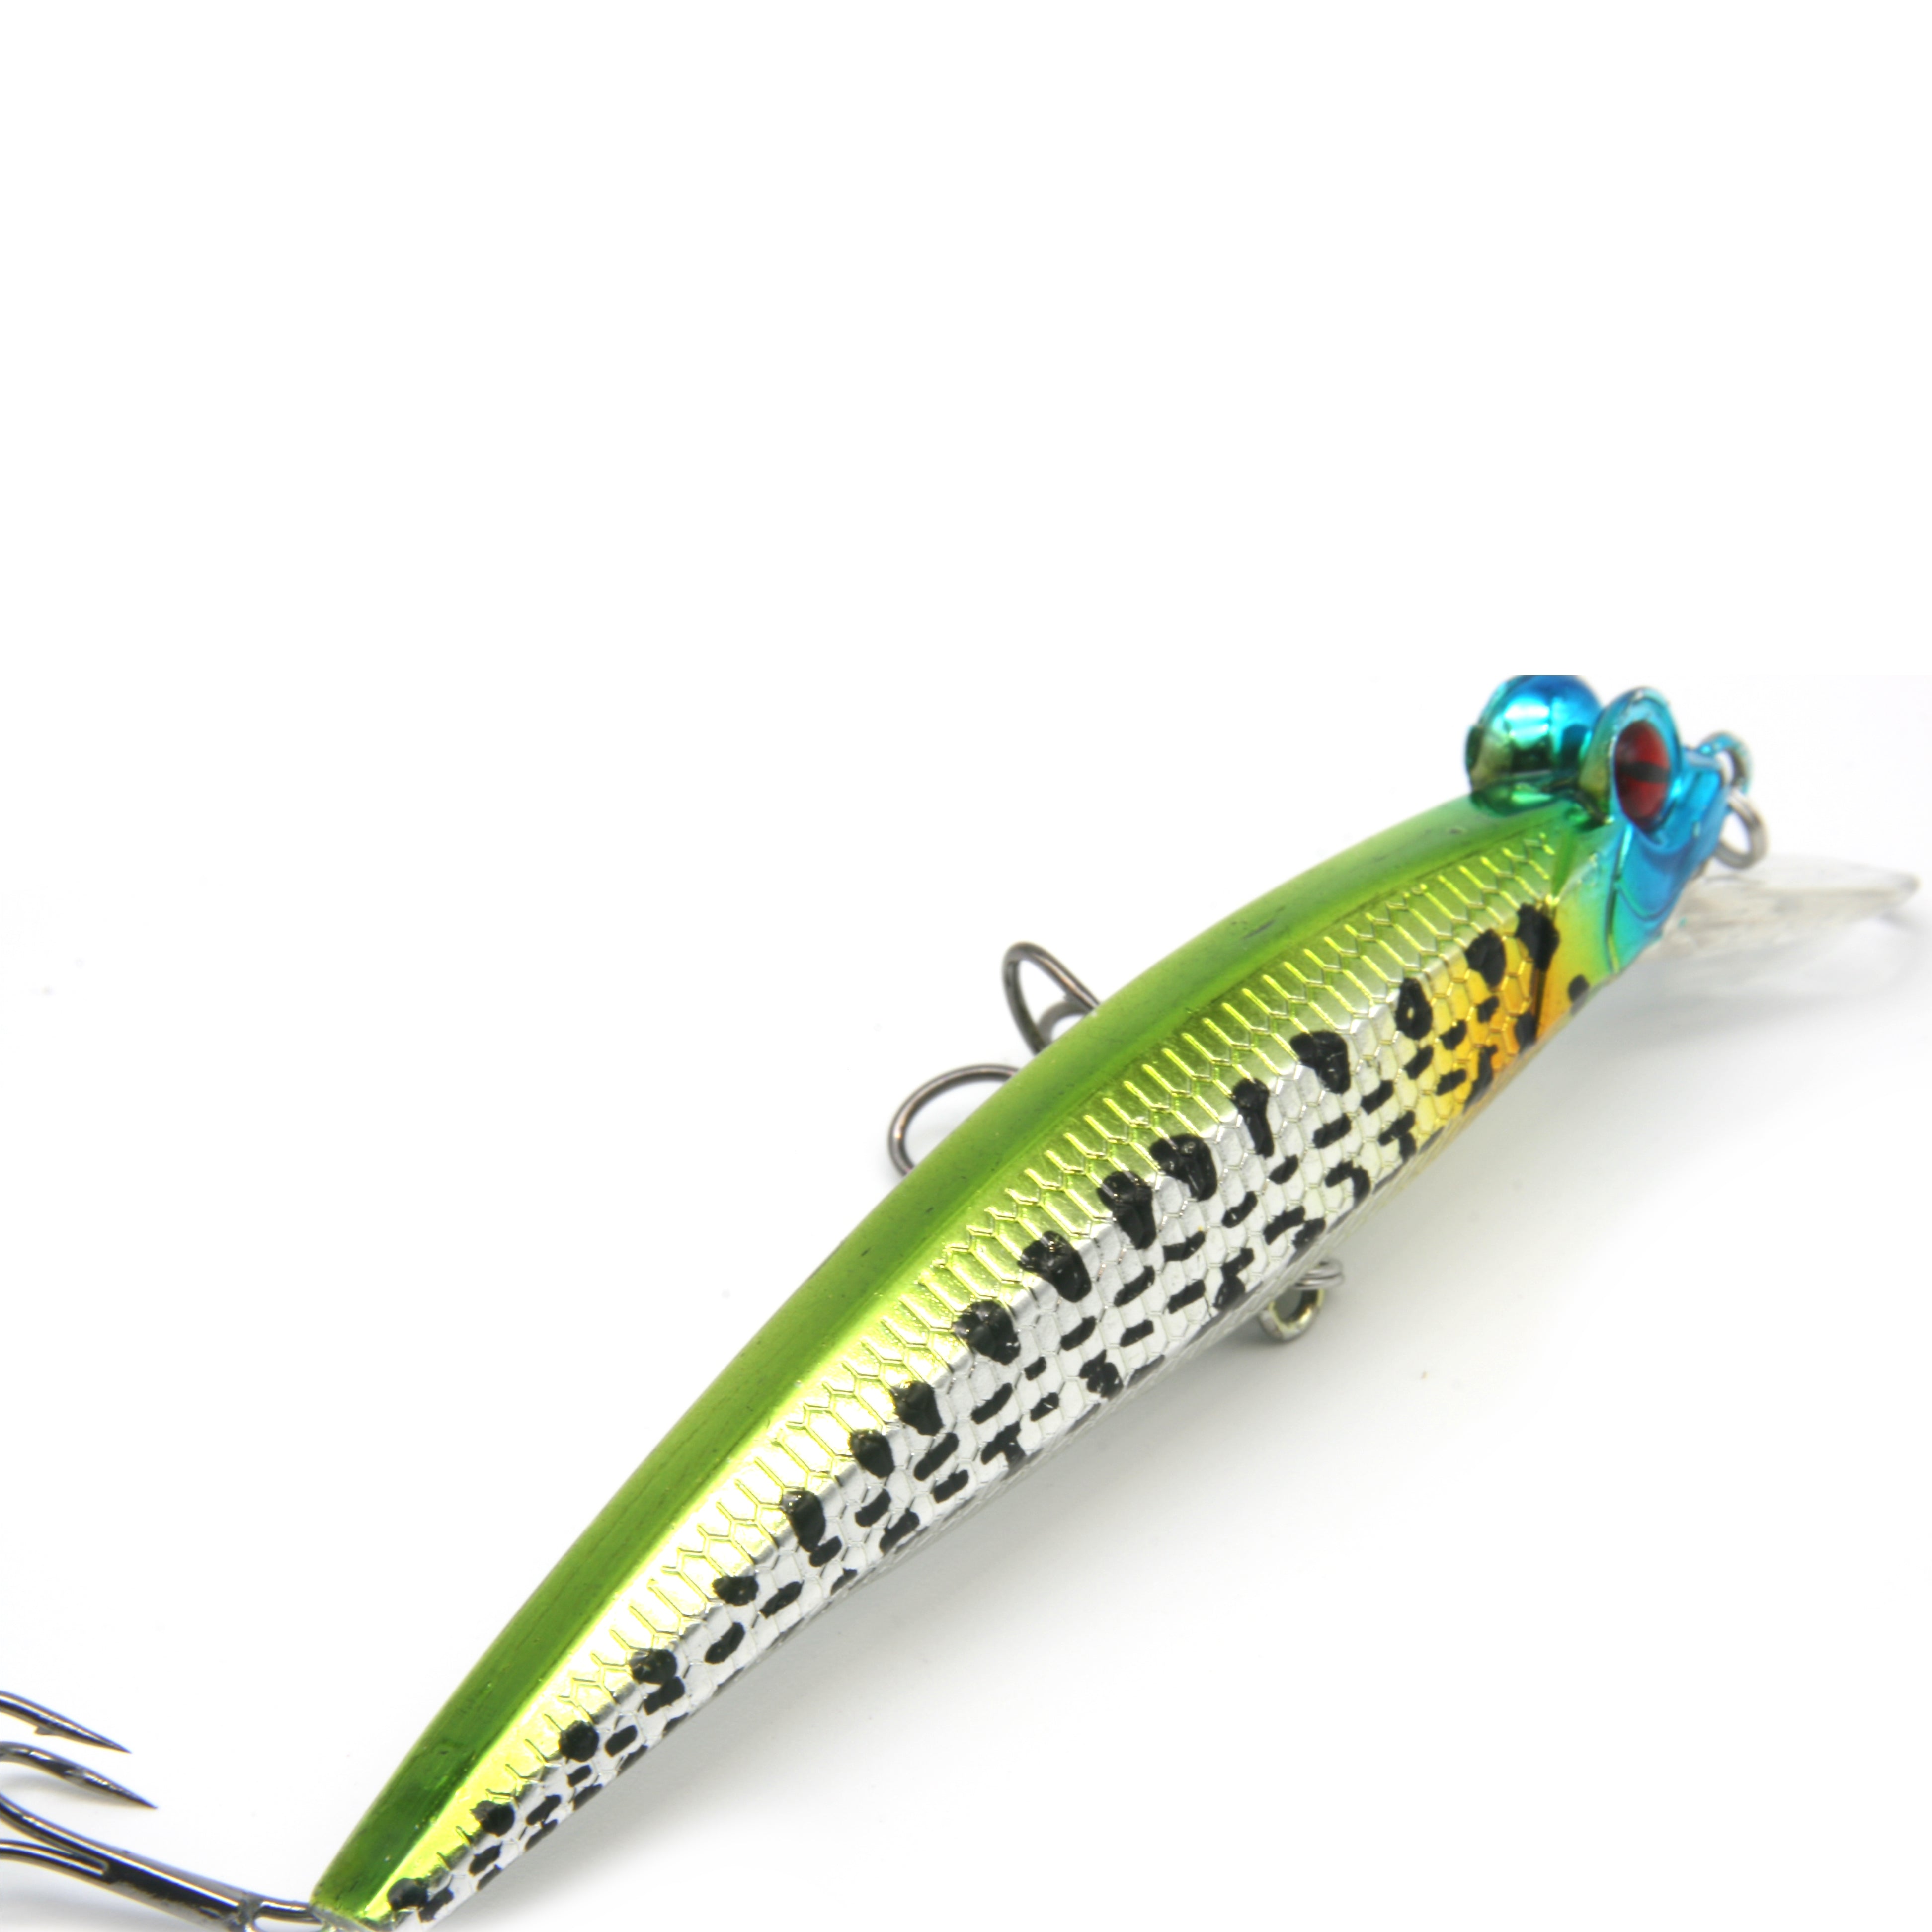 Evergreen/ Funky Frog 65mm 12g Fishing Lure No.173